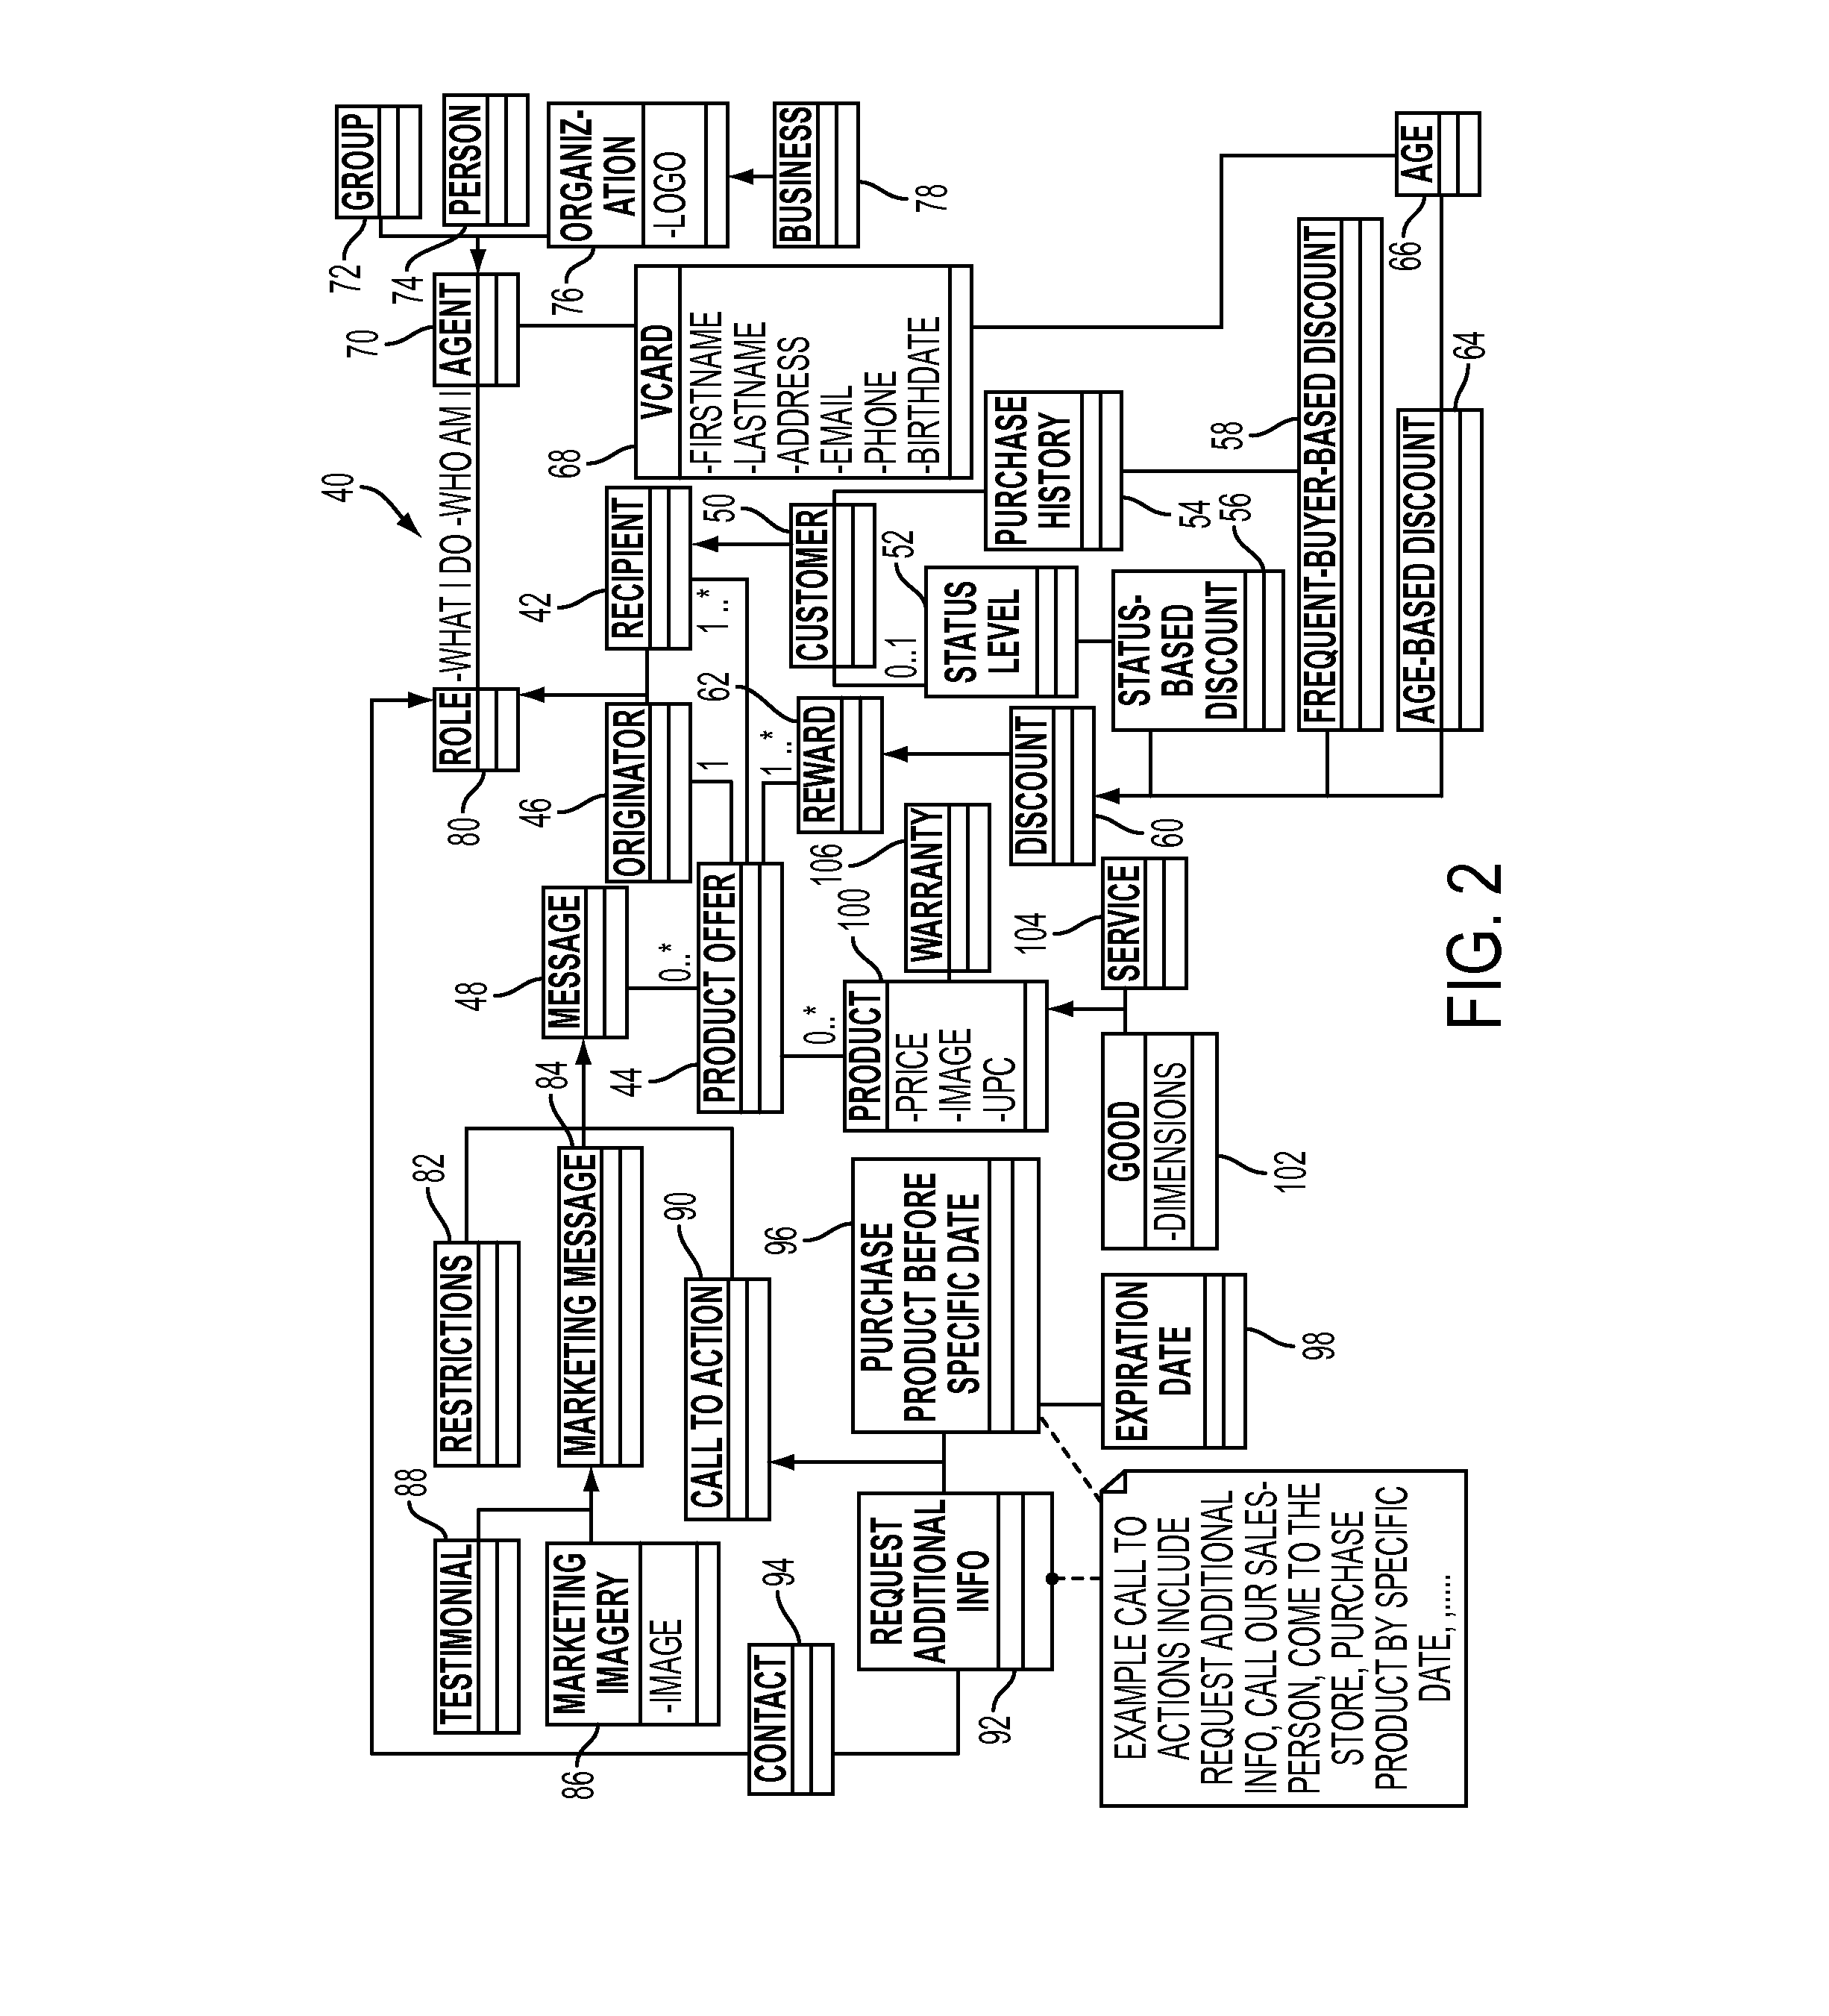 Method for automatically visualizing and describing the logic of a variable-data campaign